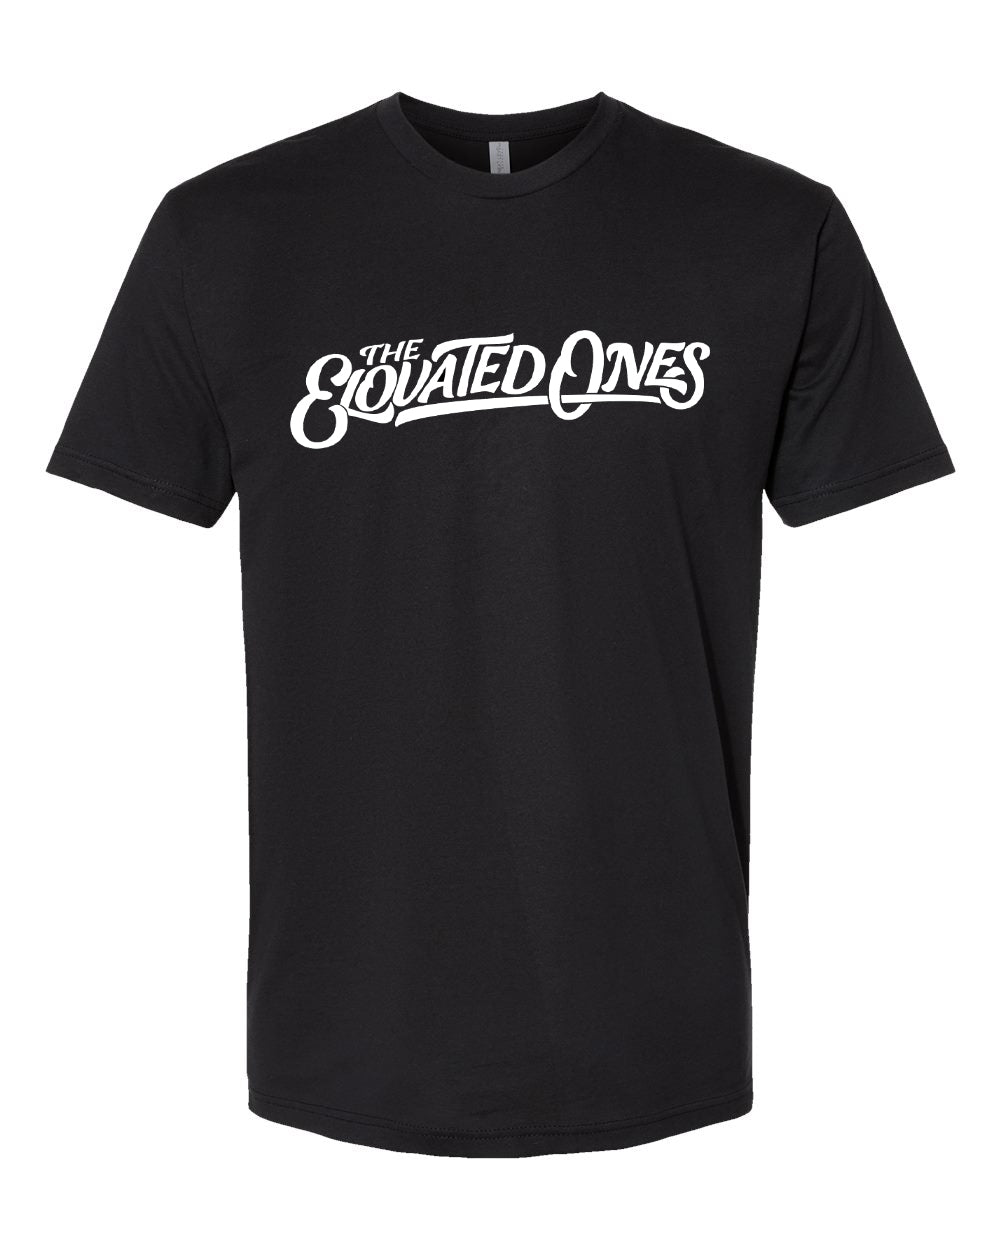 The Elovated Ones Tee